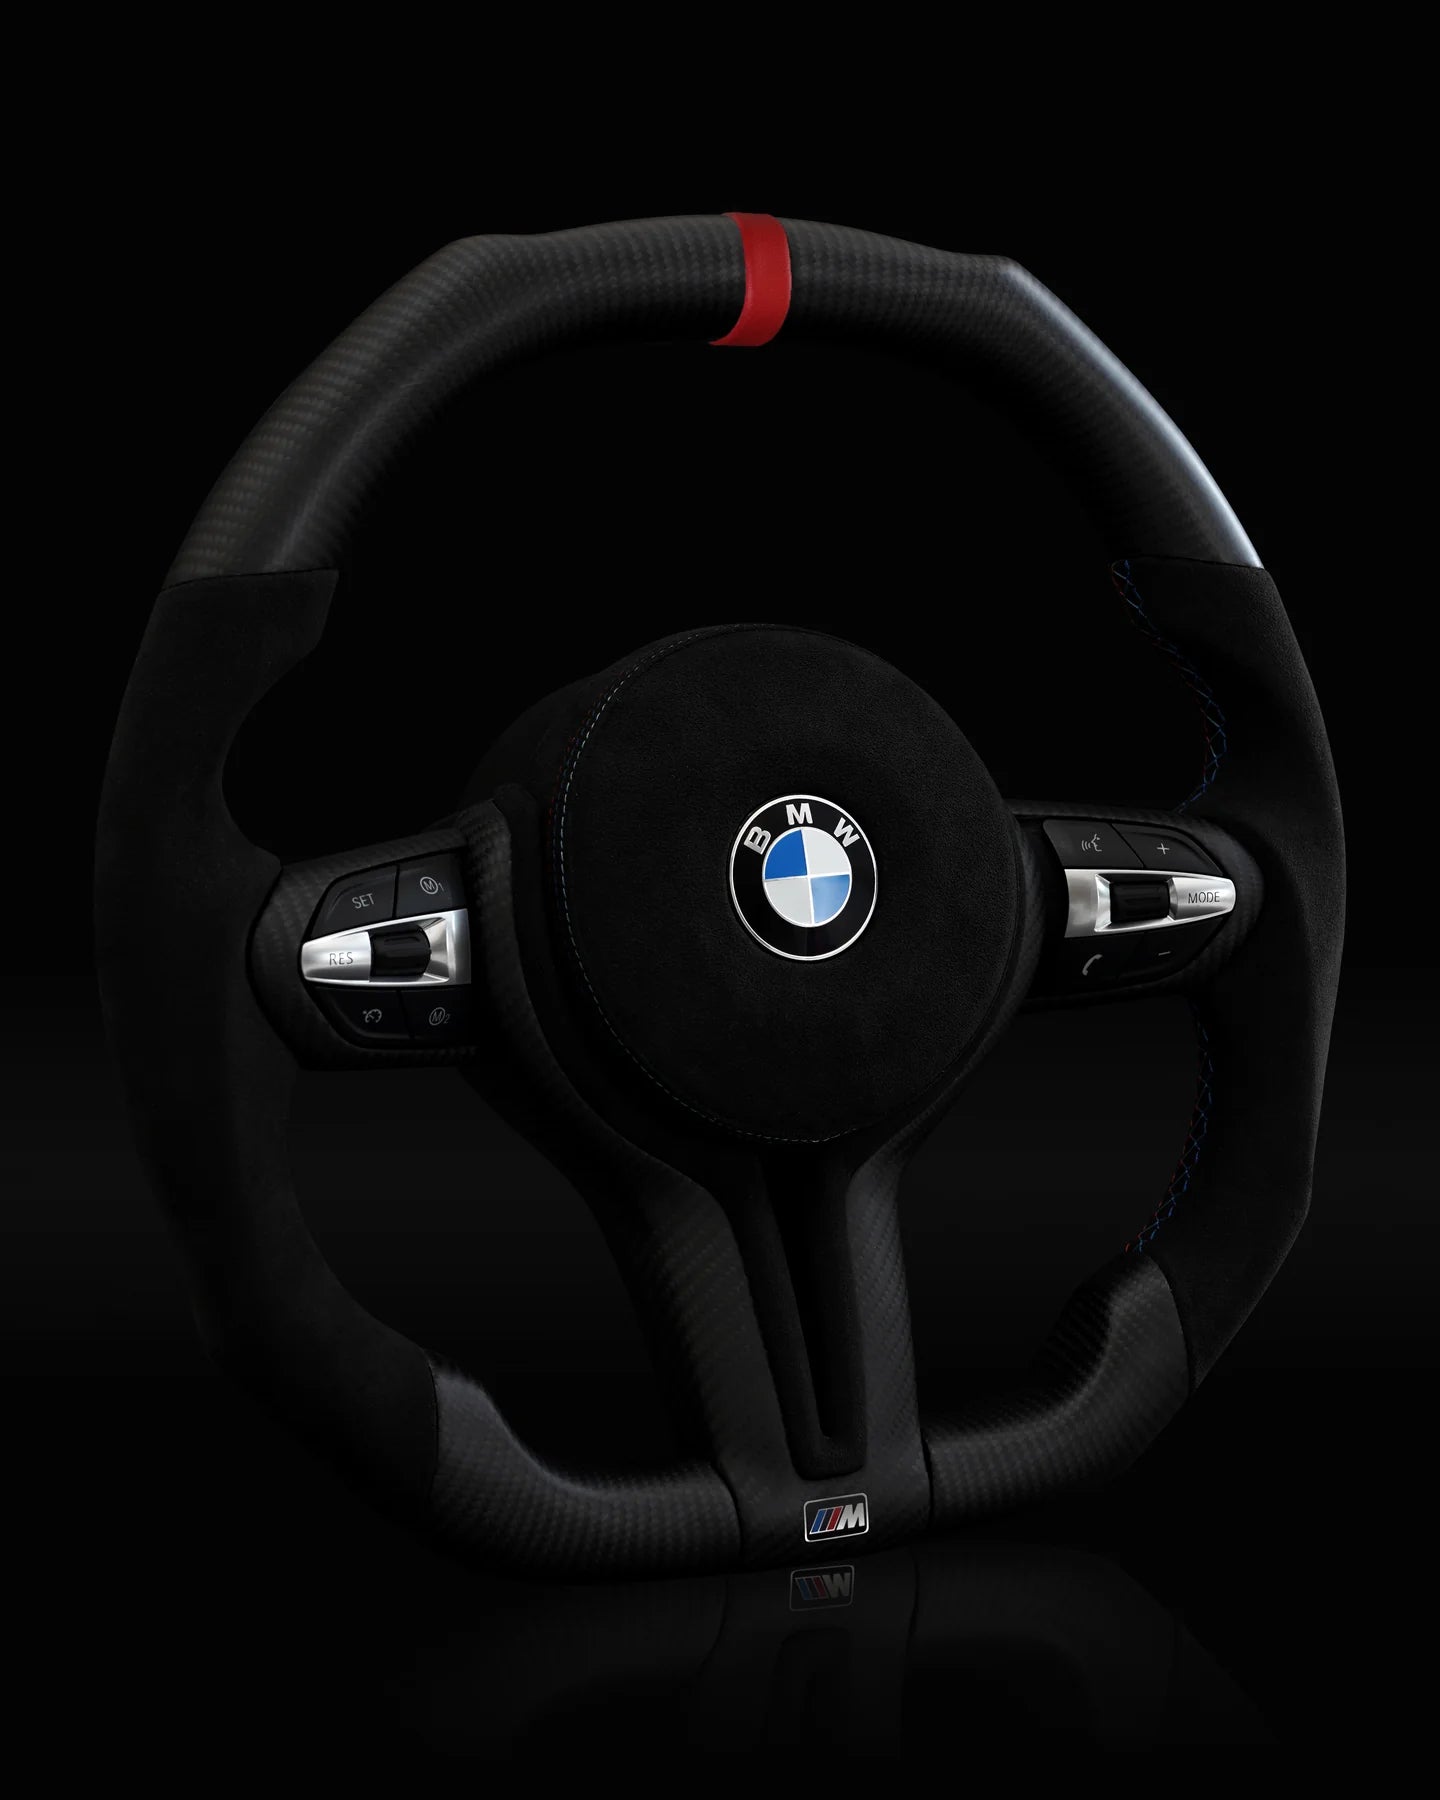 BMW Alcantara Flat Bottom Matte Dry Carbon Fiber Steering Wheel for F Chassis- iCBL's Signature Design for F30 F32 F80 F82 M3 M4 M2 335i 340i 328i 440i 435i - iCBL